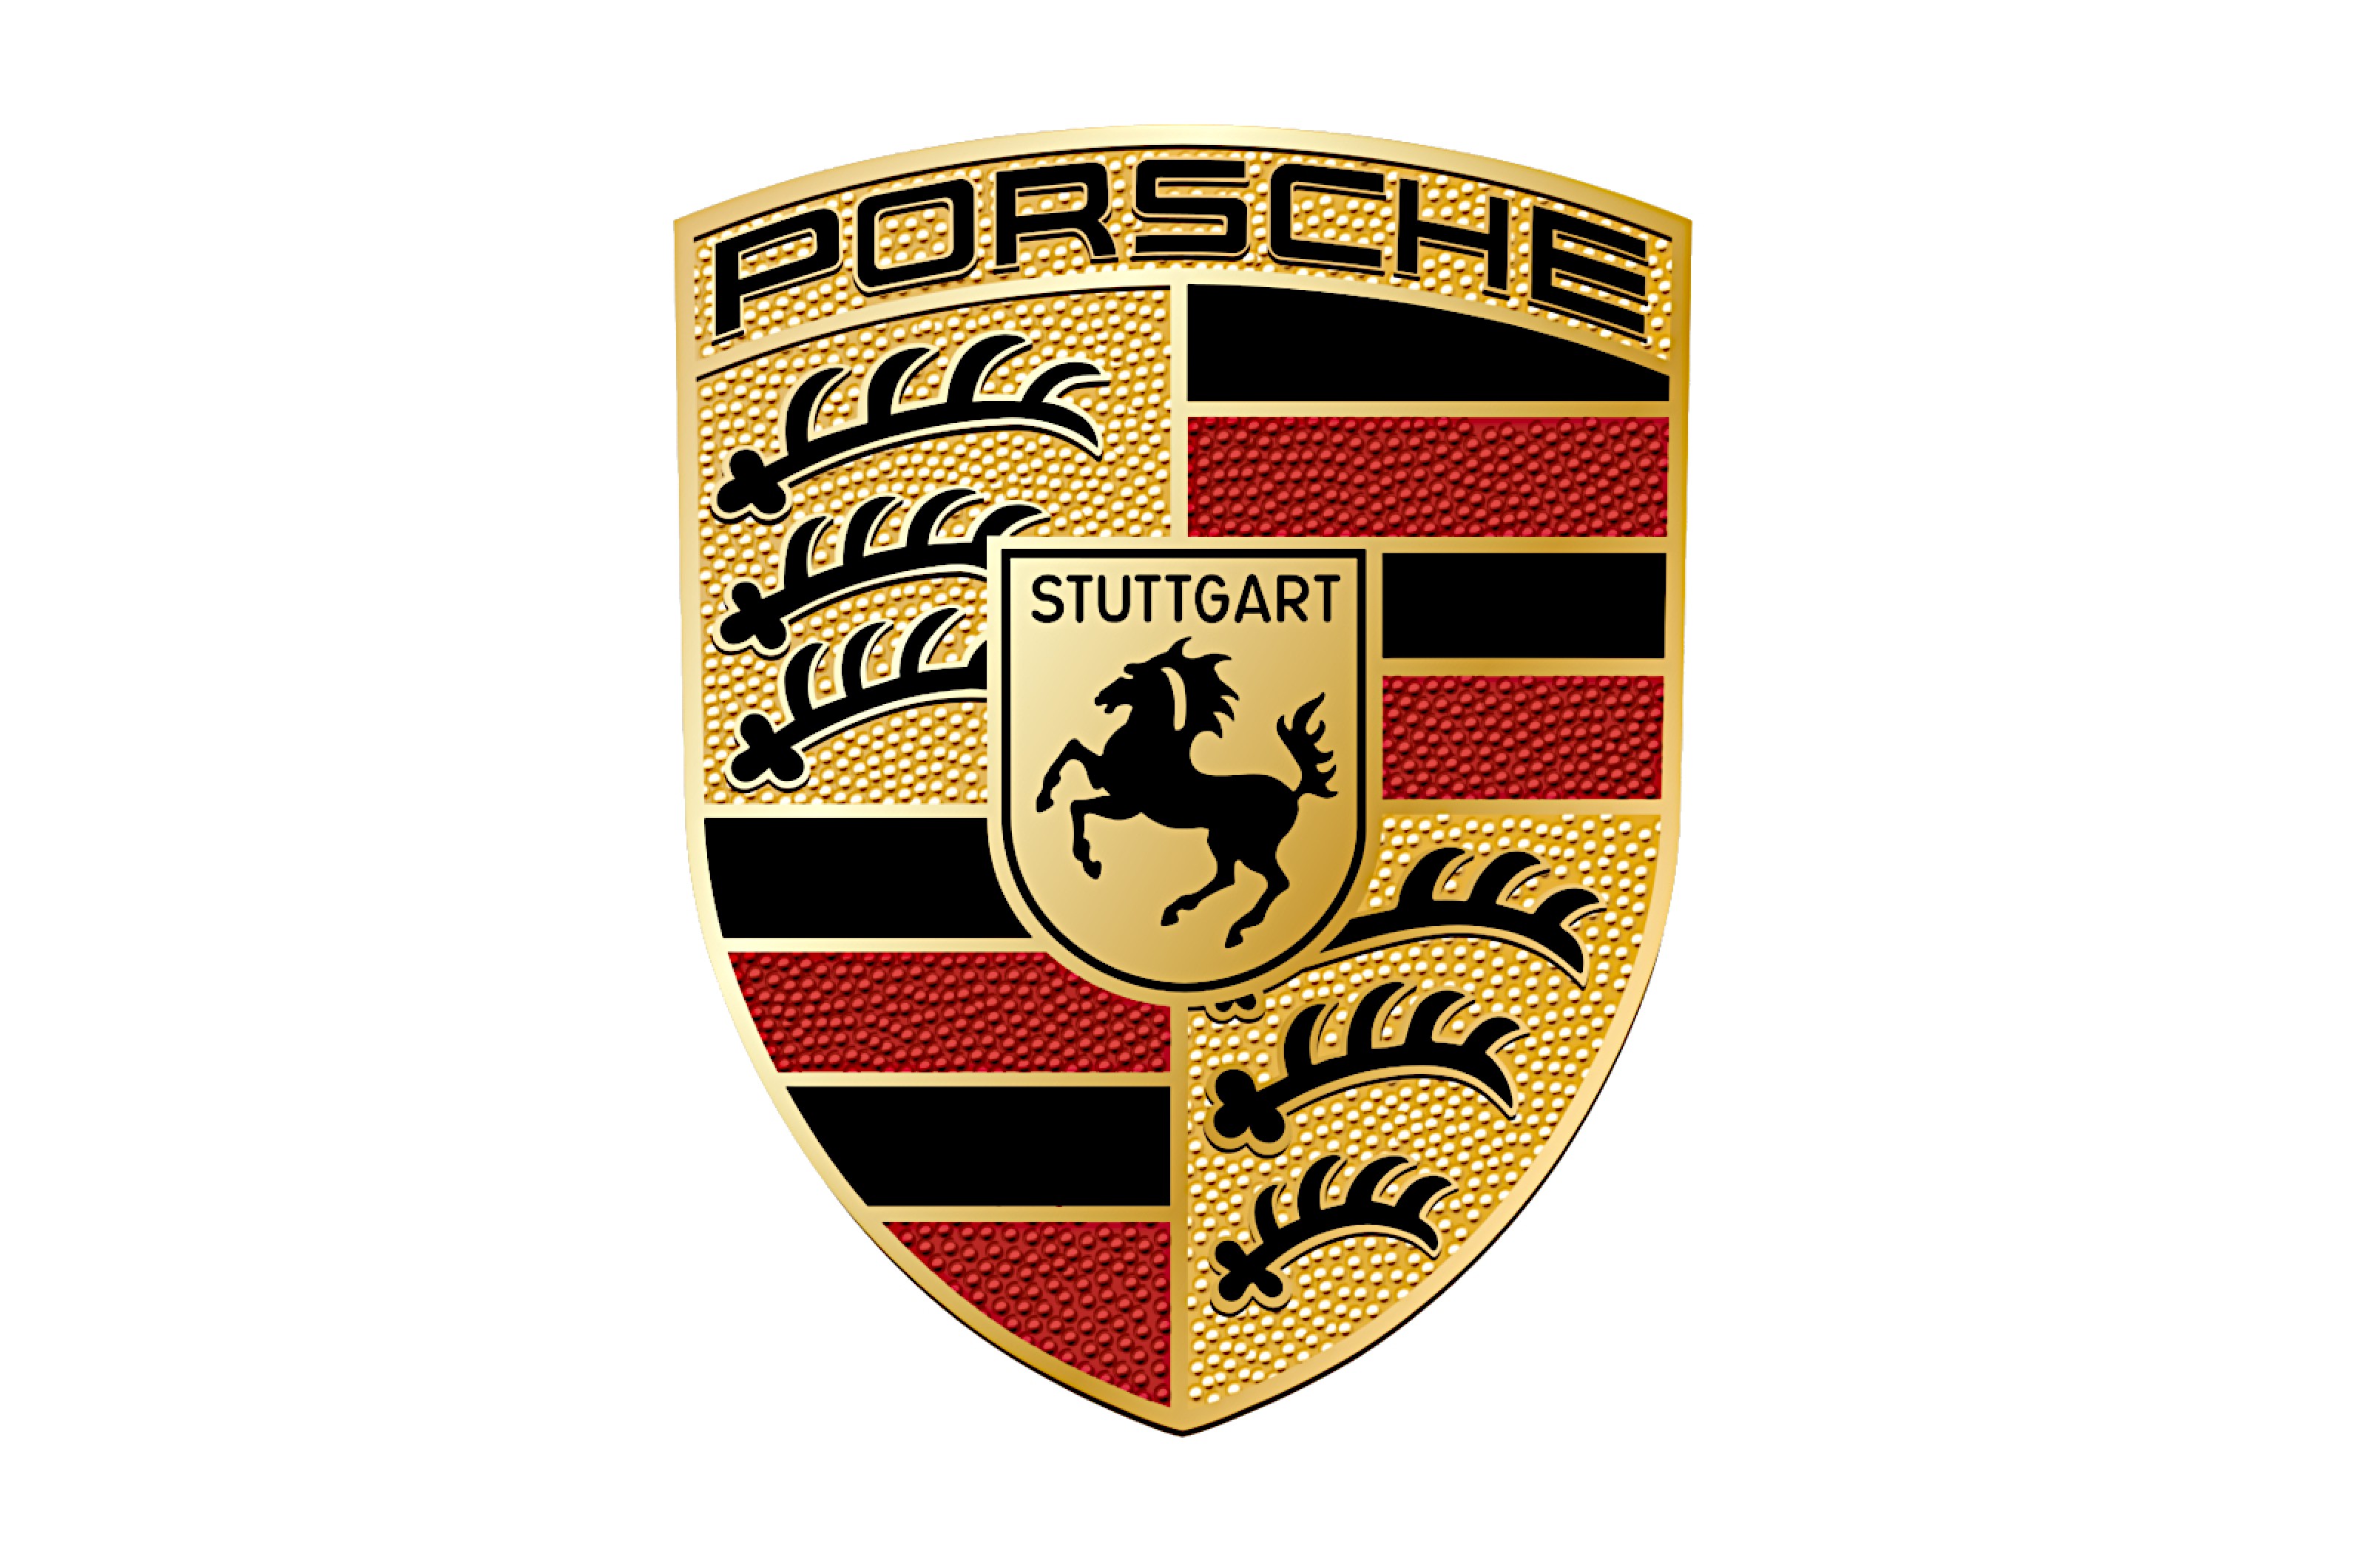 <p>The Porsche logo has hardly changed at all since it first appeared on the steering wheel of the 356 sports car in late 1952.</p>  <p>It’s based on the coat of arms of Württemberg-Hohenzollern, which existed at the beginning of that year but had been merged with two neighboring states to form the current Baden-Württemberg by the time the logo made its debut.</p>  <p>The shield has four quadrants, two showing three black antlers on a yellow background, the others showing the red and black stripes which formed the Württemberg-Hohenzollern state flag.</p>  <p>Within that shield is another containing the Ferrari-like prancing horse from both the flag and the coat of arms of Stuttgart, where Porsche is based.</p>